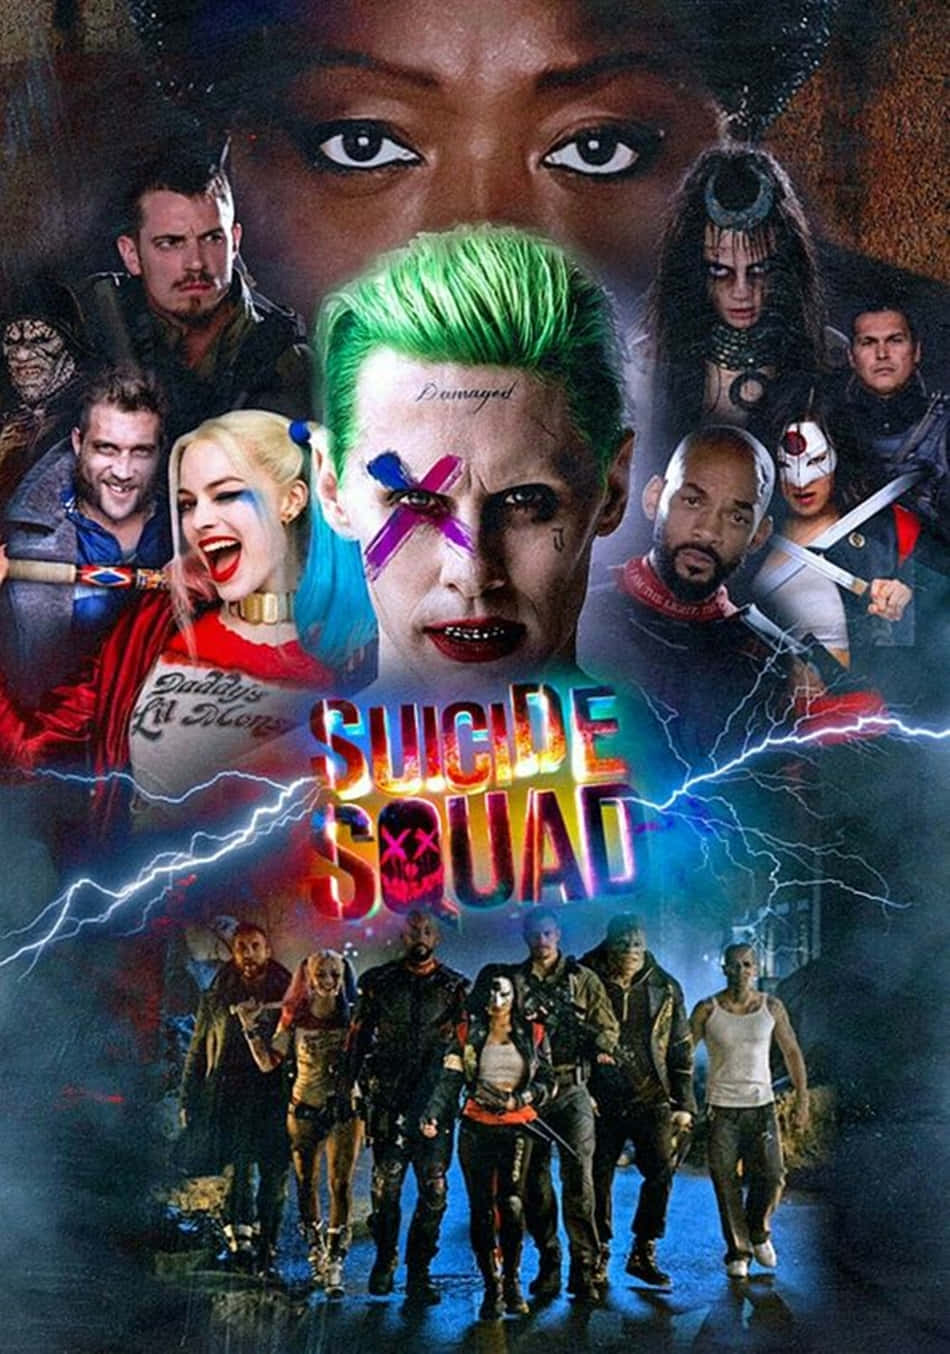 A Look Into ‘The Suicide Squad’ Wallpaper